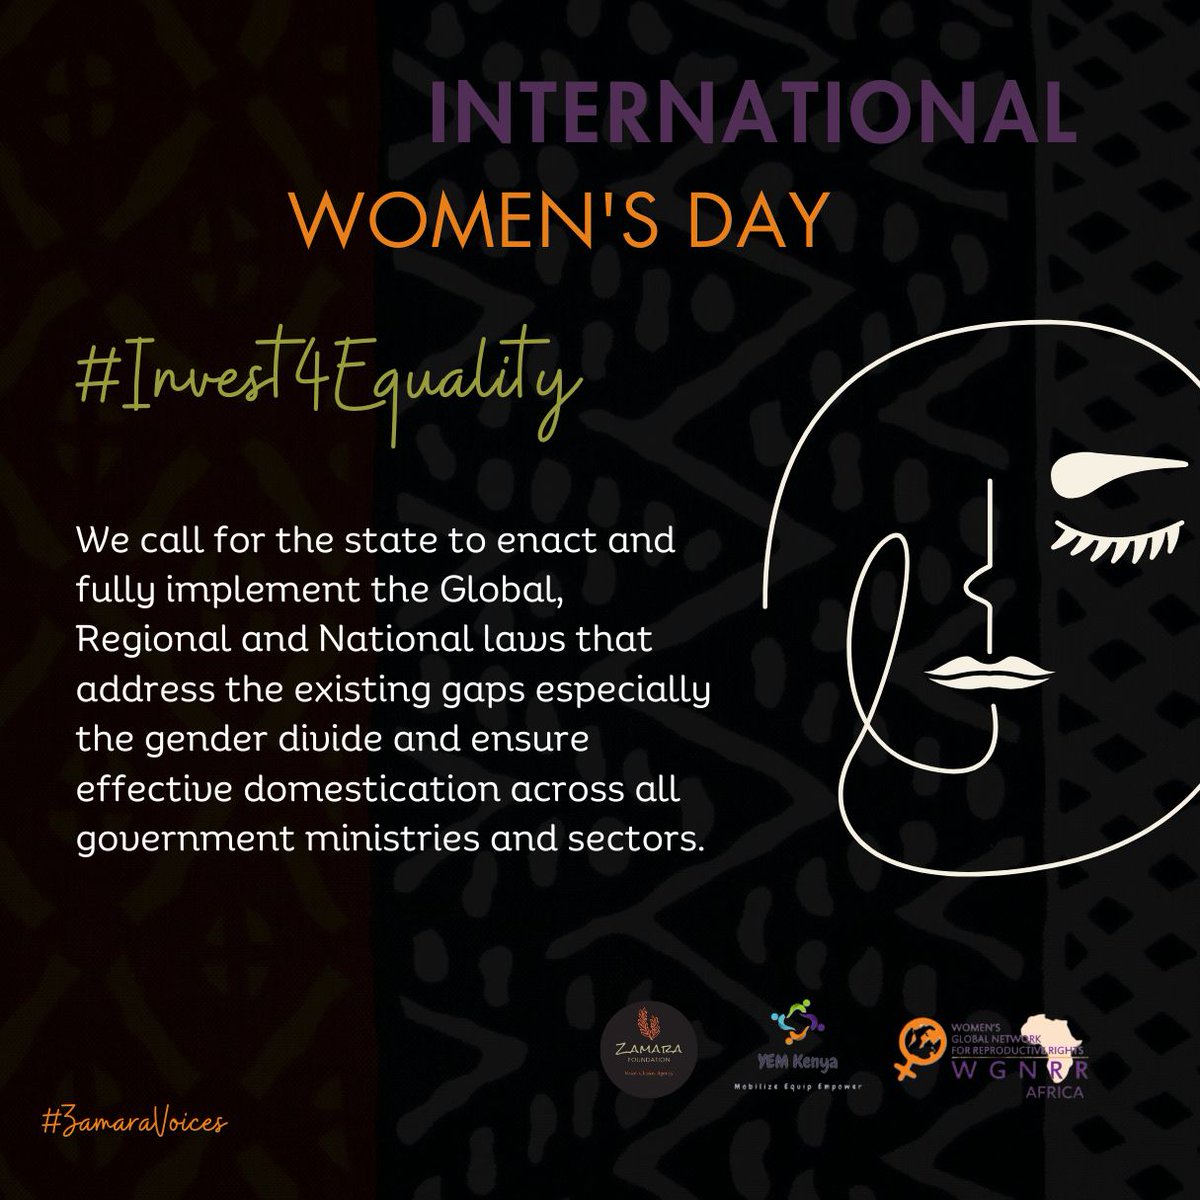 By advocating for policies and laws that promote gender equality and protect the rights of all women, regardless of their diversity.#Invest4Equality 
 #ZamaraVoices 
@Zamara_fdn
@YEMKenya
@wgnrr_africa